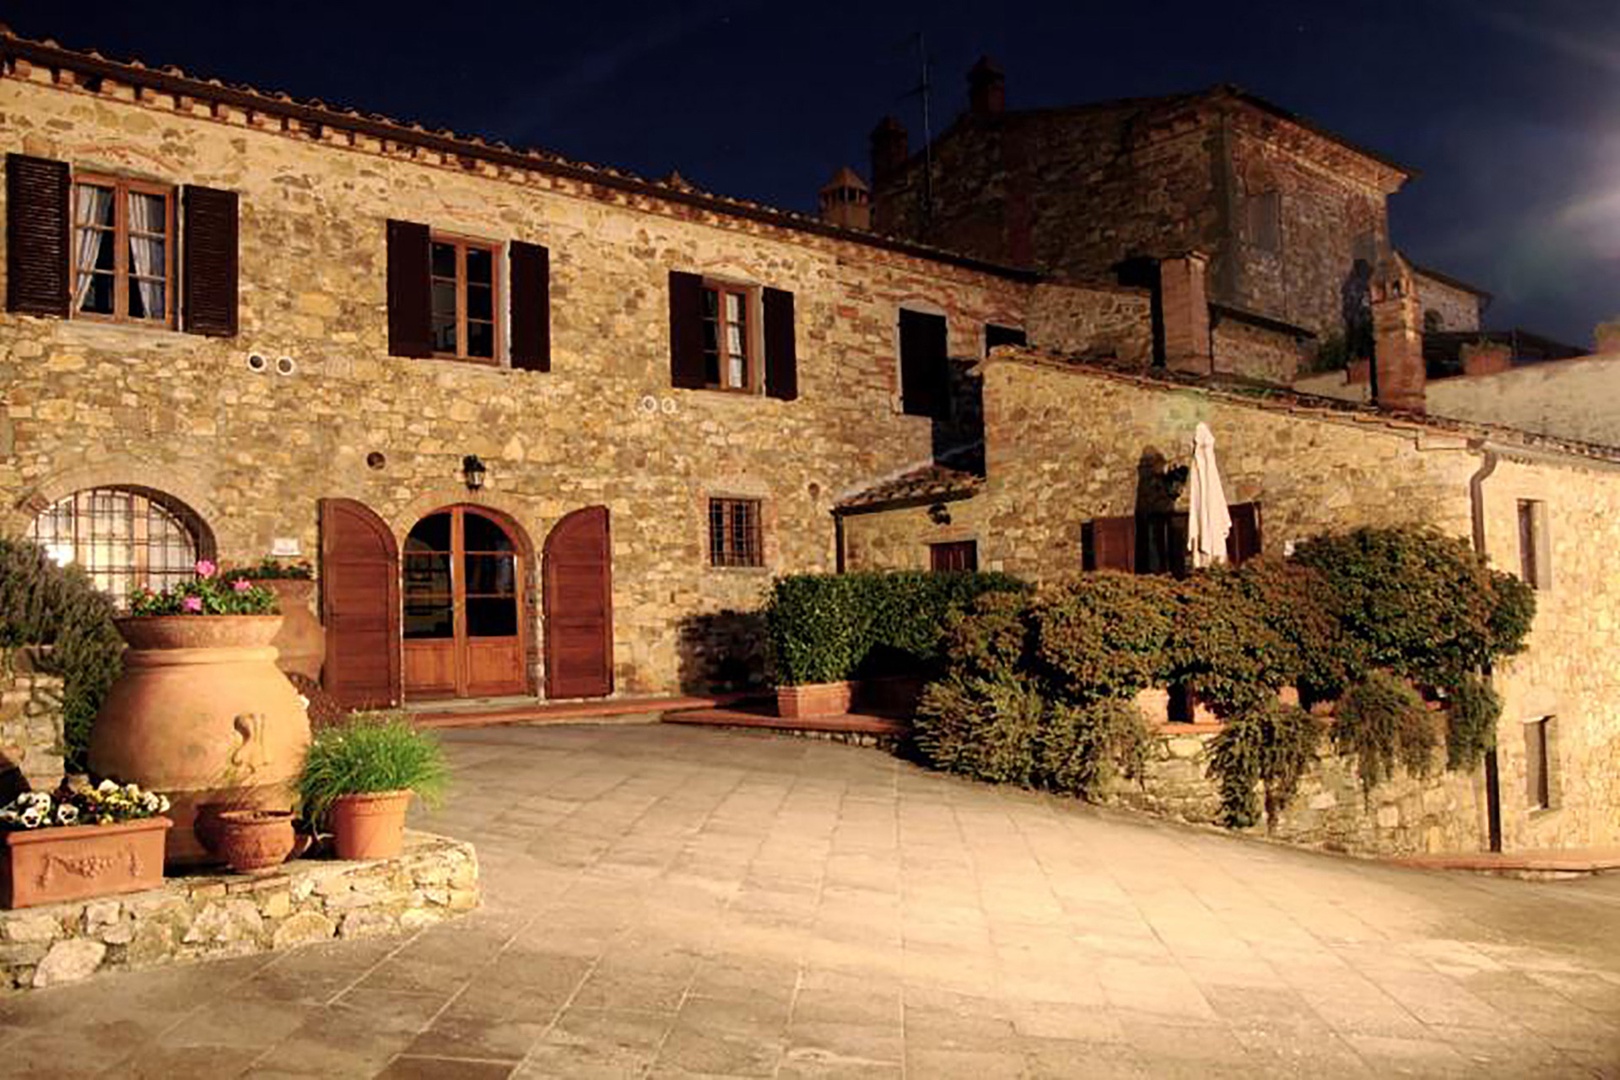 Evening view of the entrance of the Poggio apartment.